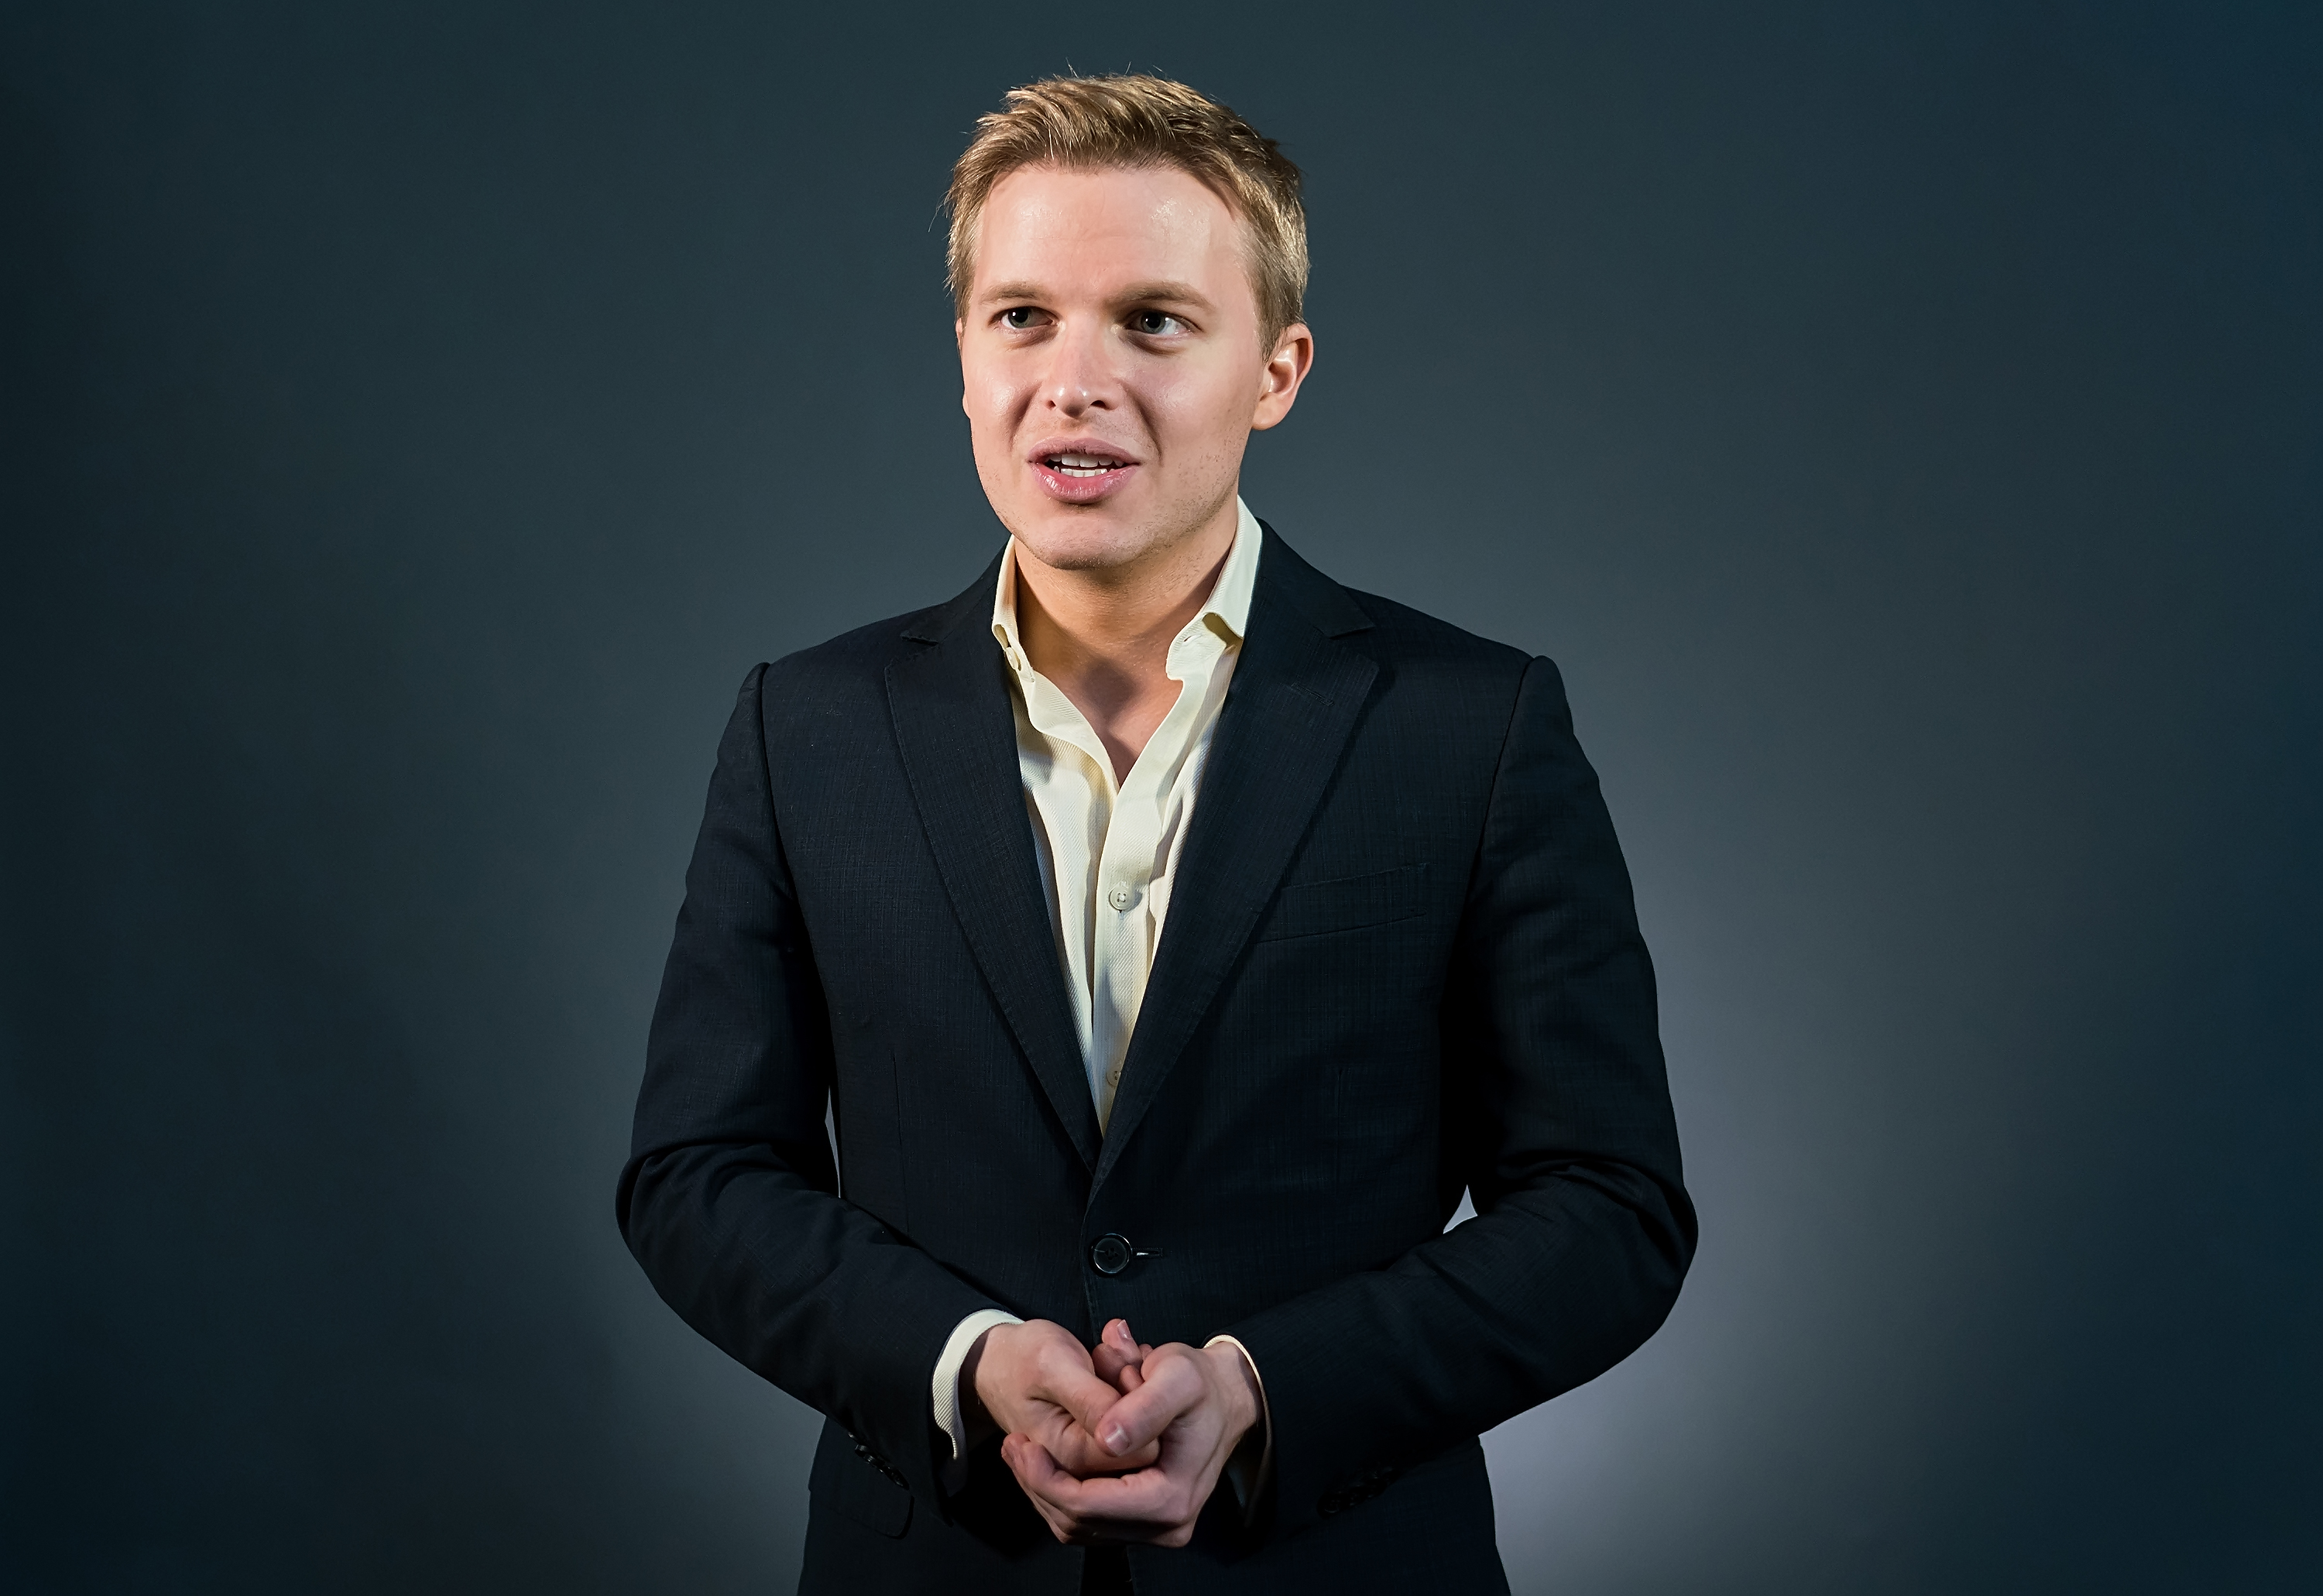 Ronan Farrow attends the Forbes Under 30 Summit at Pennsylvania Convention Center on October 6, 2015